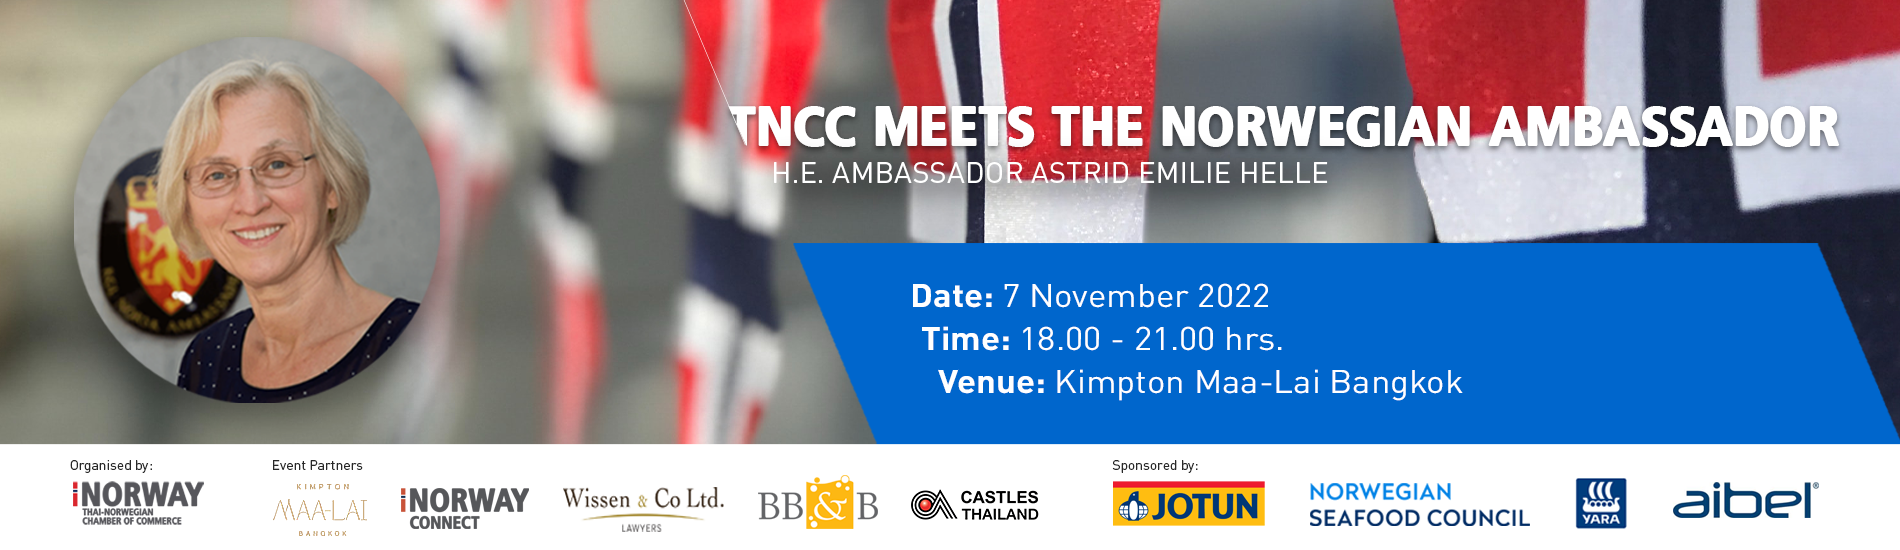 Meets the Norwegian Ambassador hosted by TNCC